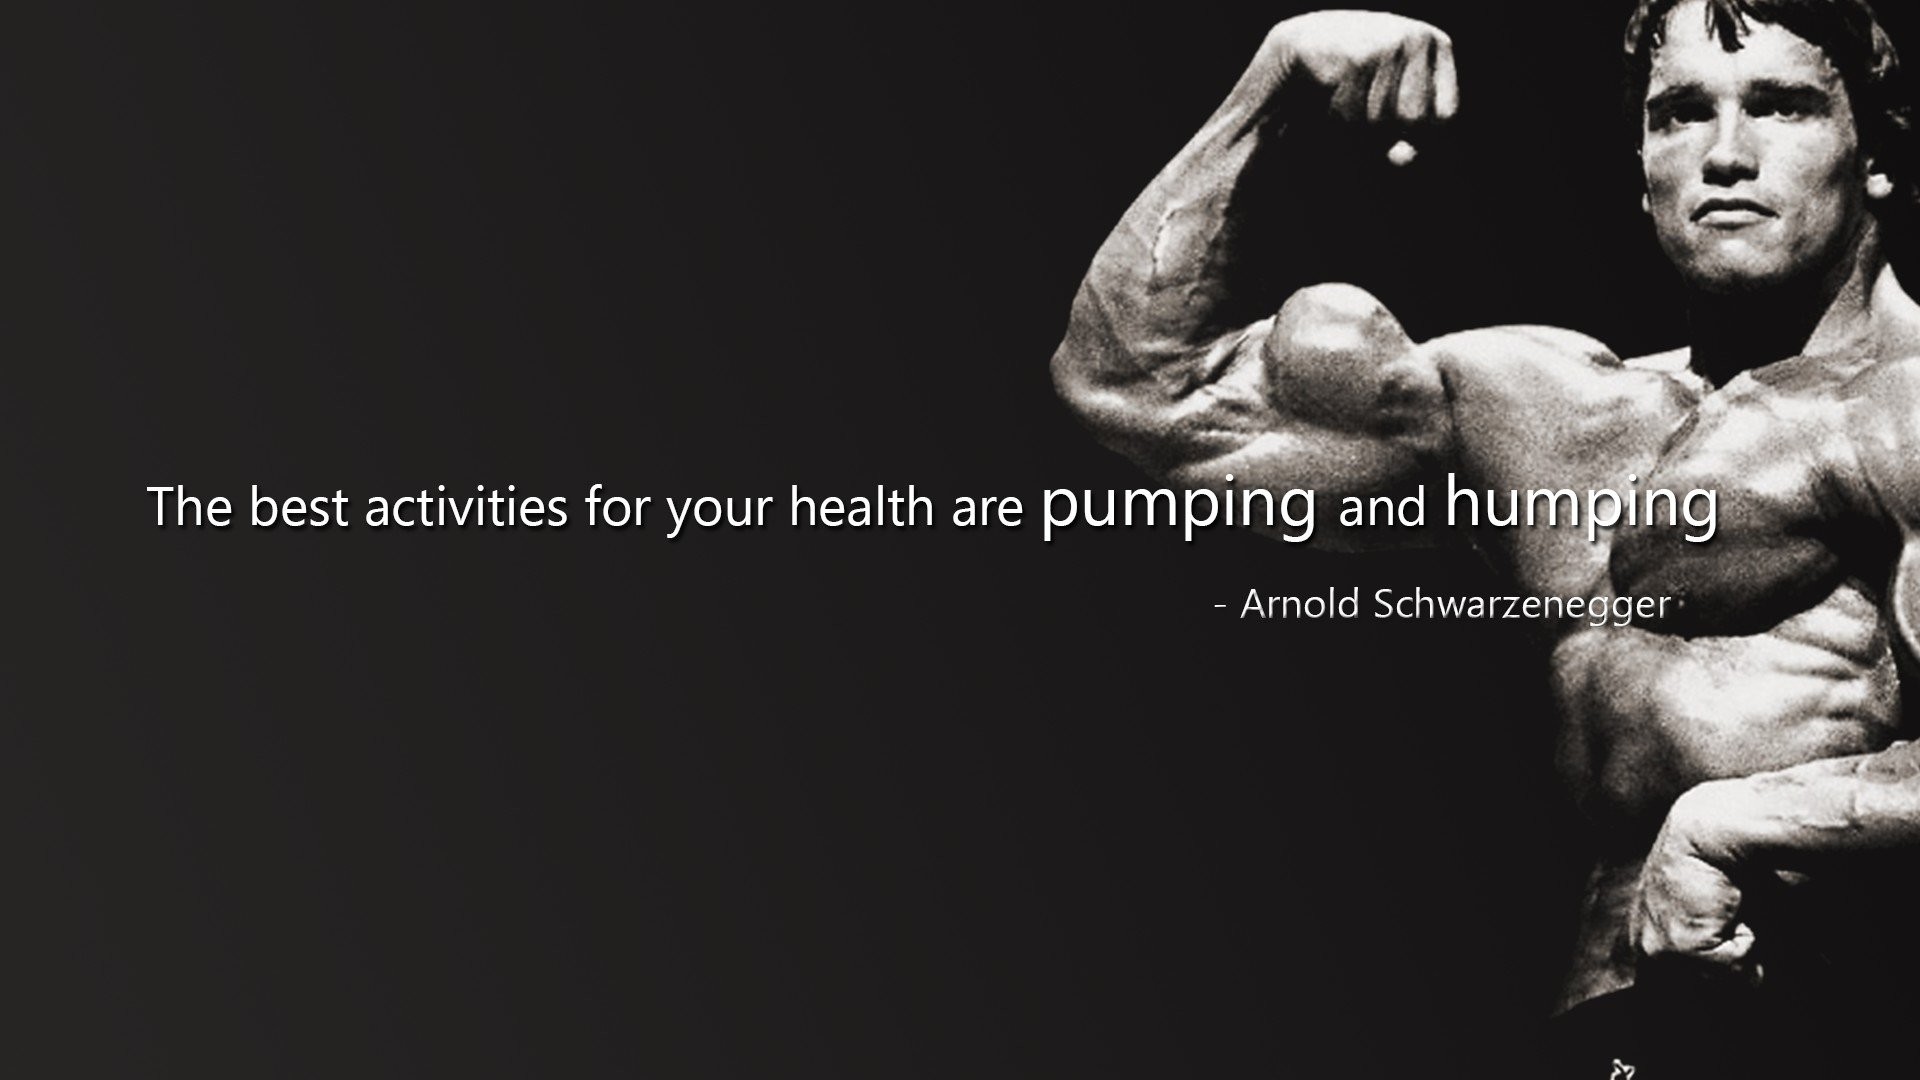 1920x1080 muscle muscles weight lifting Bodybuilding (24) wallpaper background .